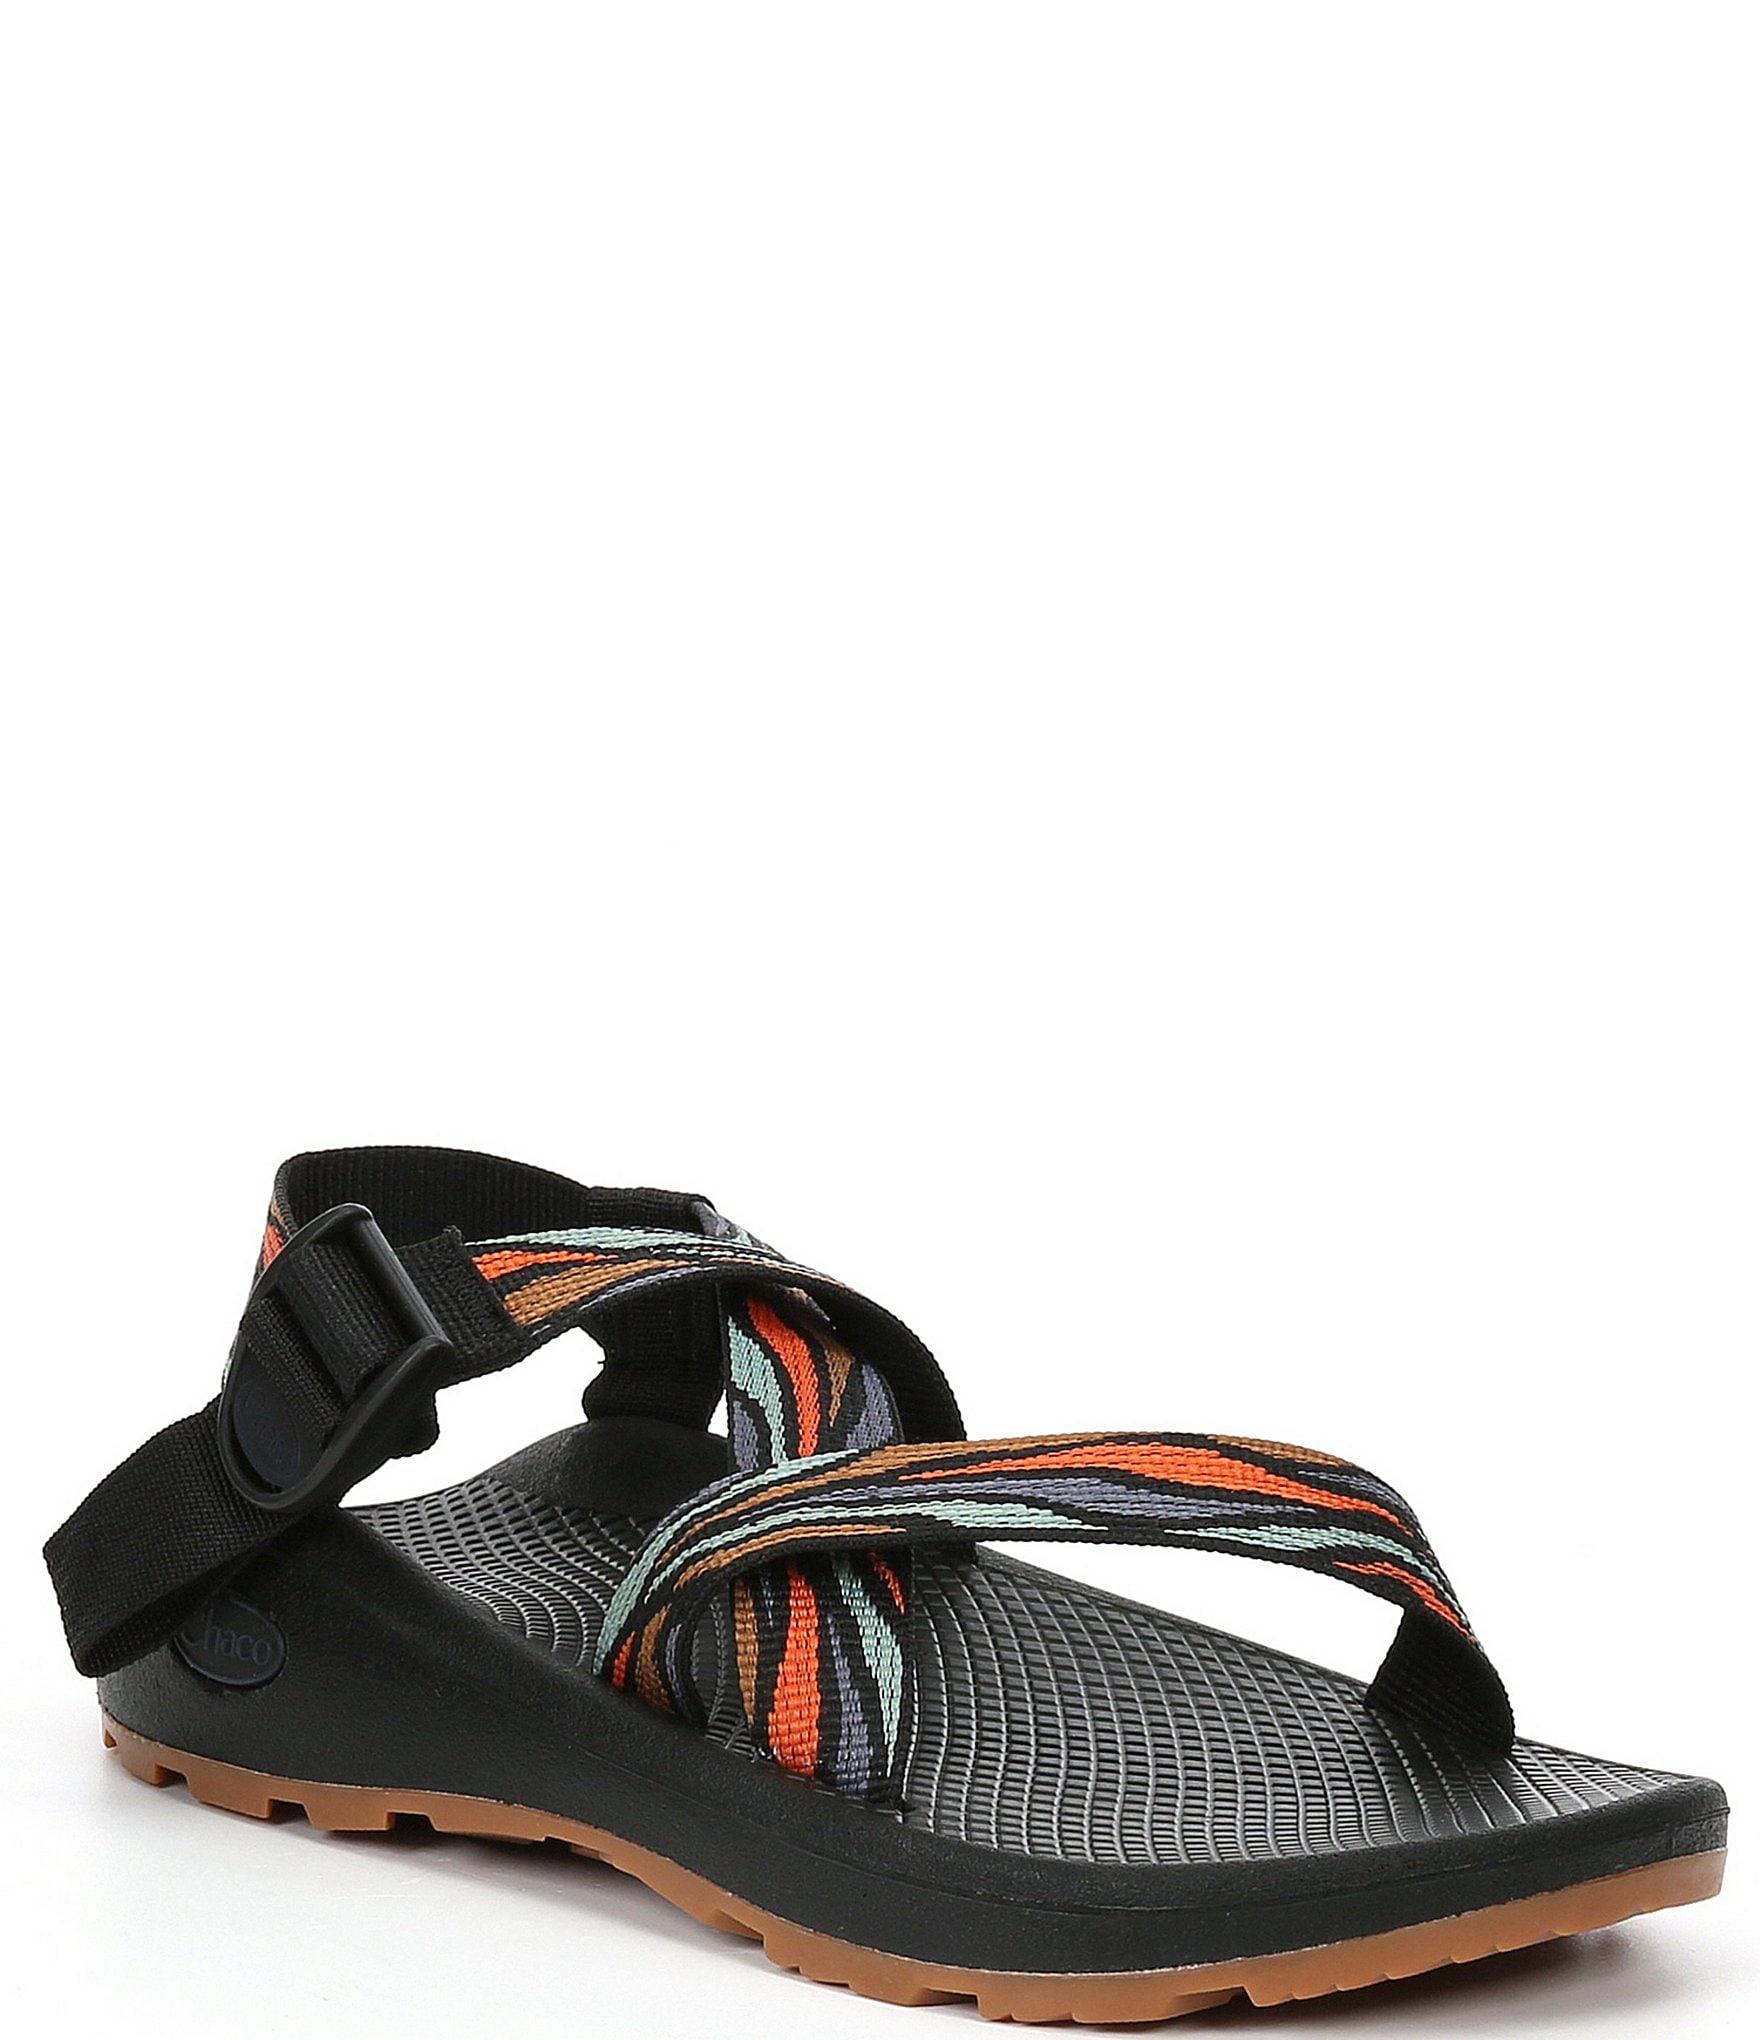 Chaco Sandals: A Travel Shoe That's Totally Worth It On Your Packing List •  Her Packing List